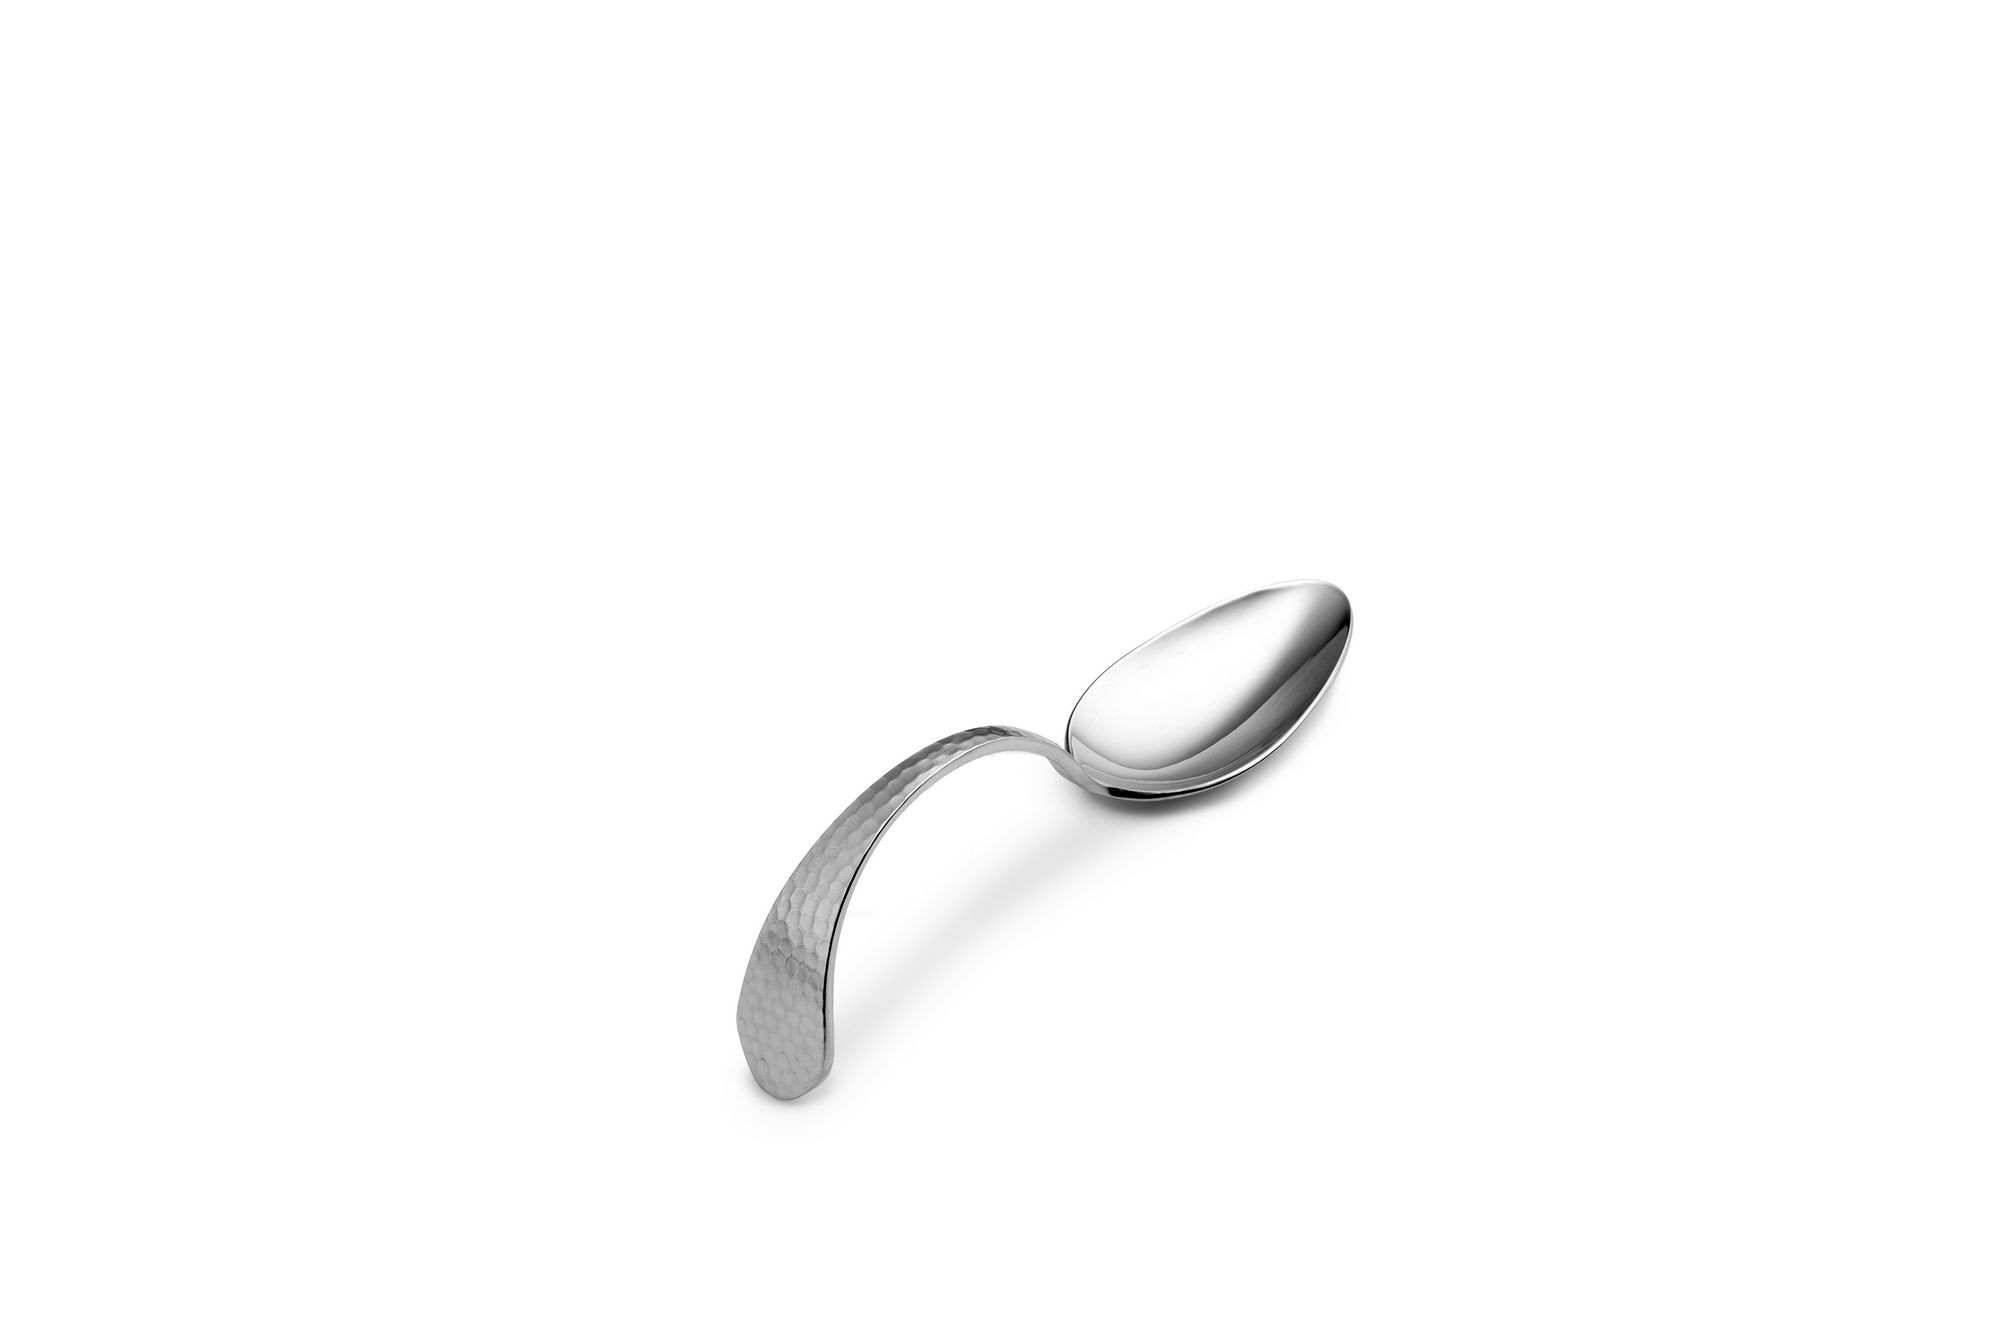 Bon Chef STS1203 Reflections Soup and Dessert Tasting Spoon